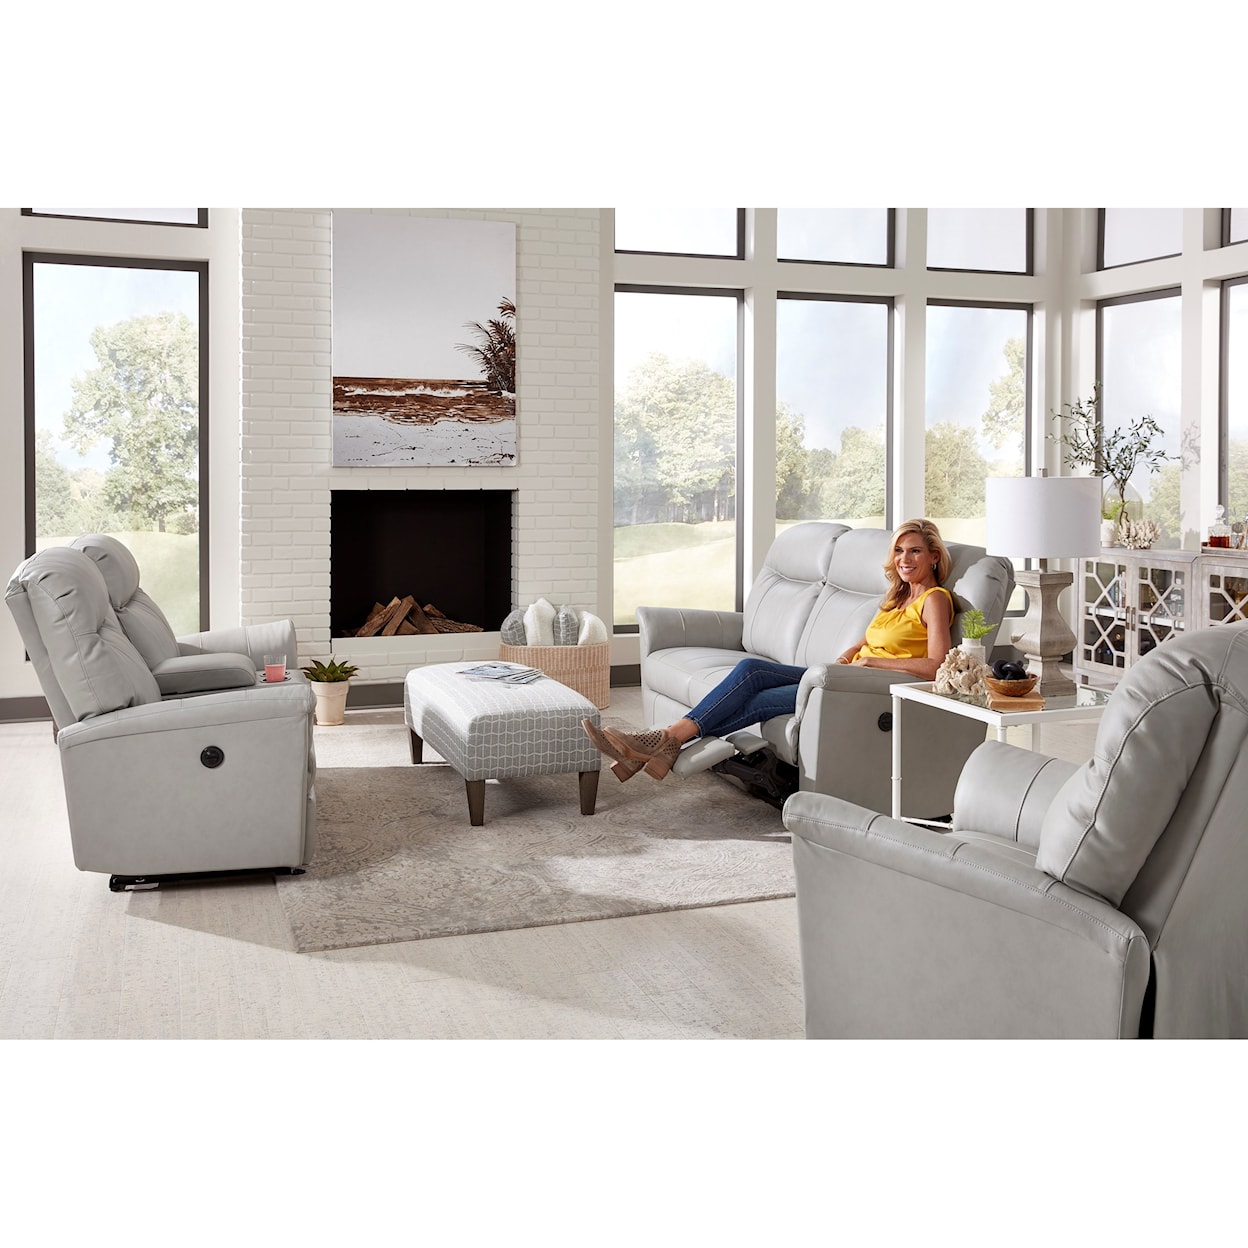 Best Home Furnishings Caitlin Power Reclining Space Saver Sofa